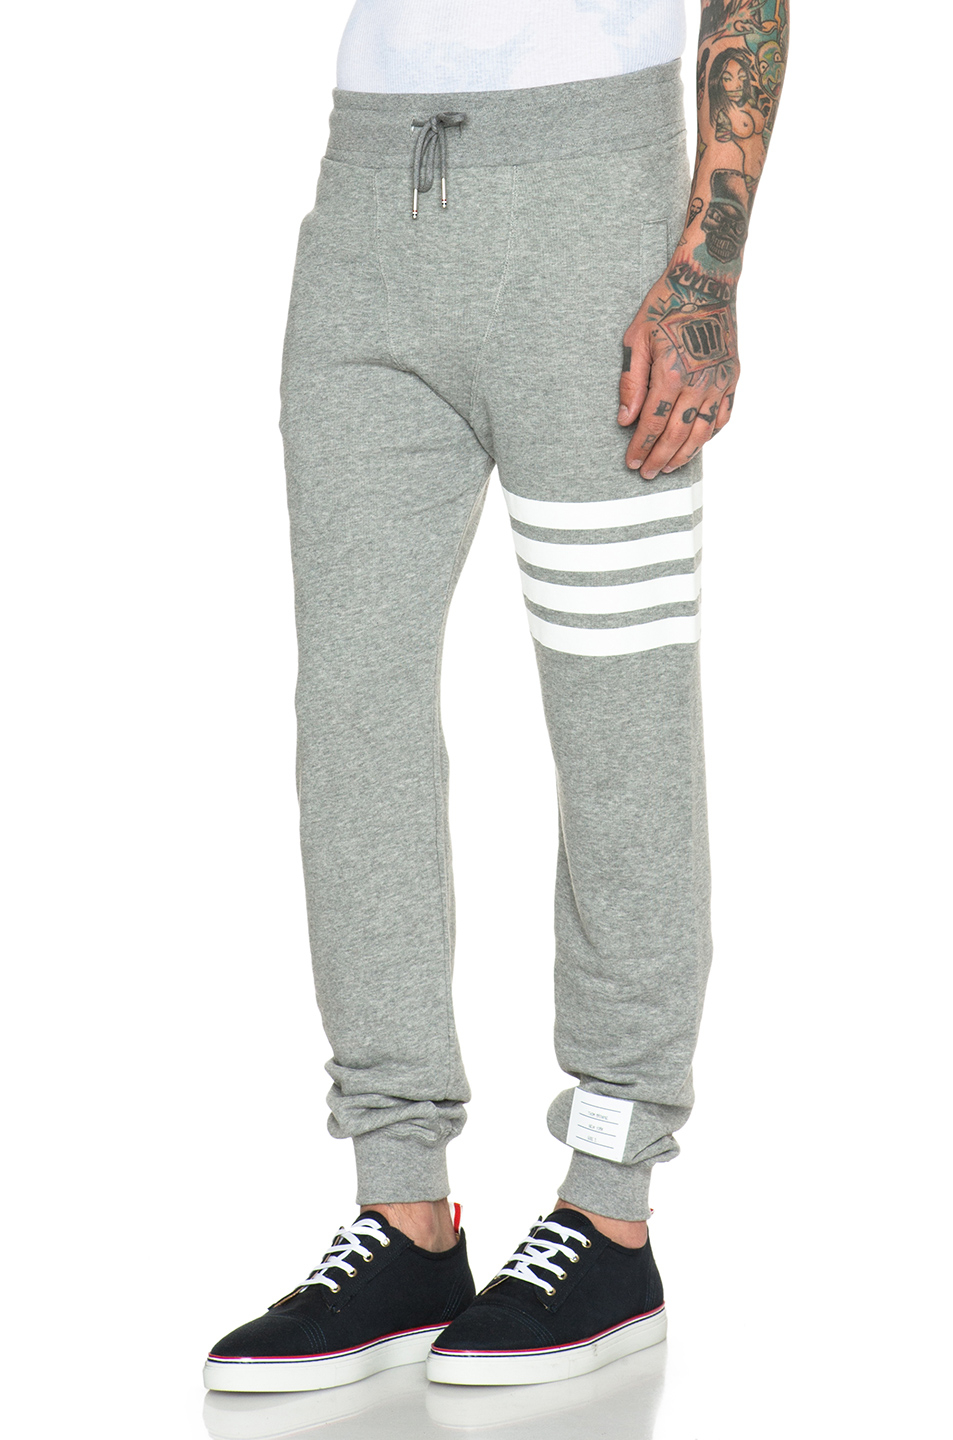 Thom browne Boxer Cotton Sweatpants in Gray | Lyst